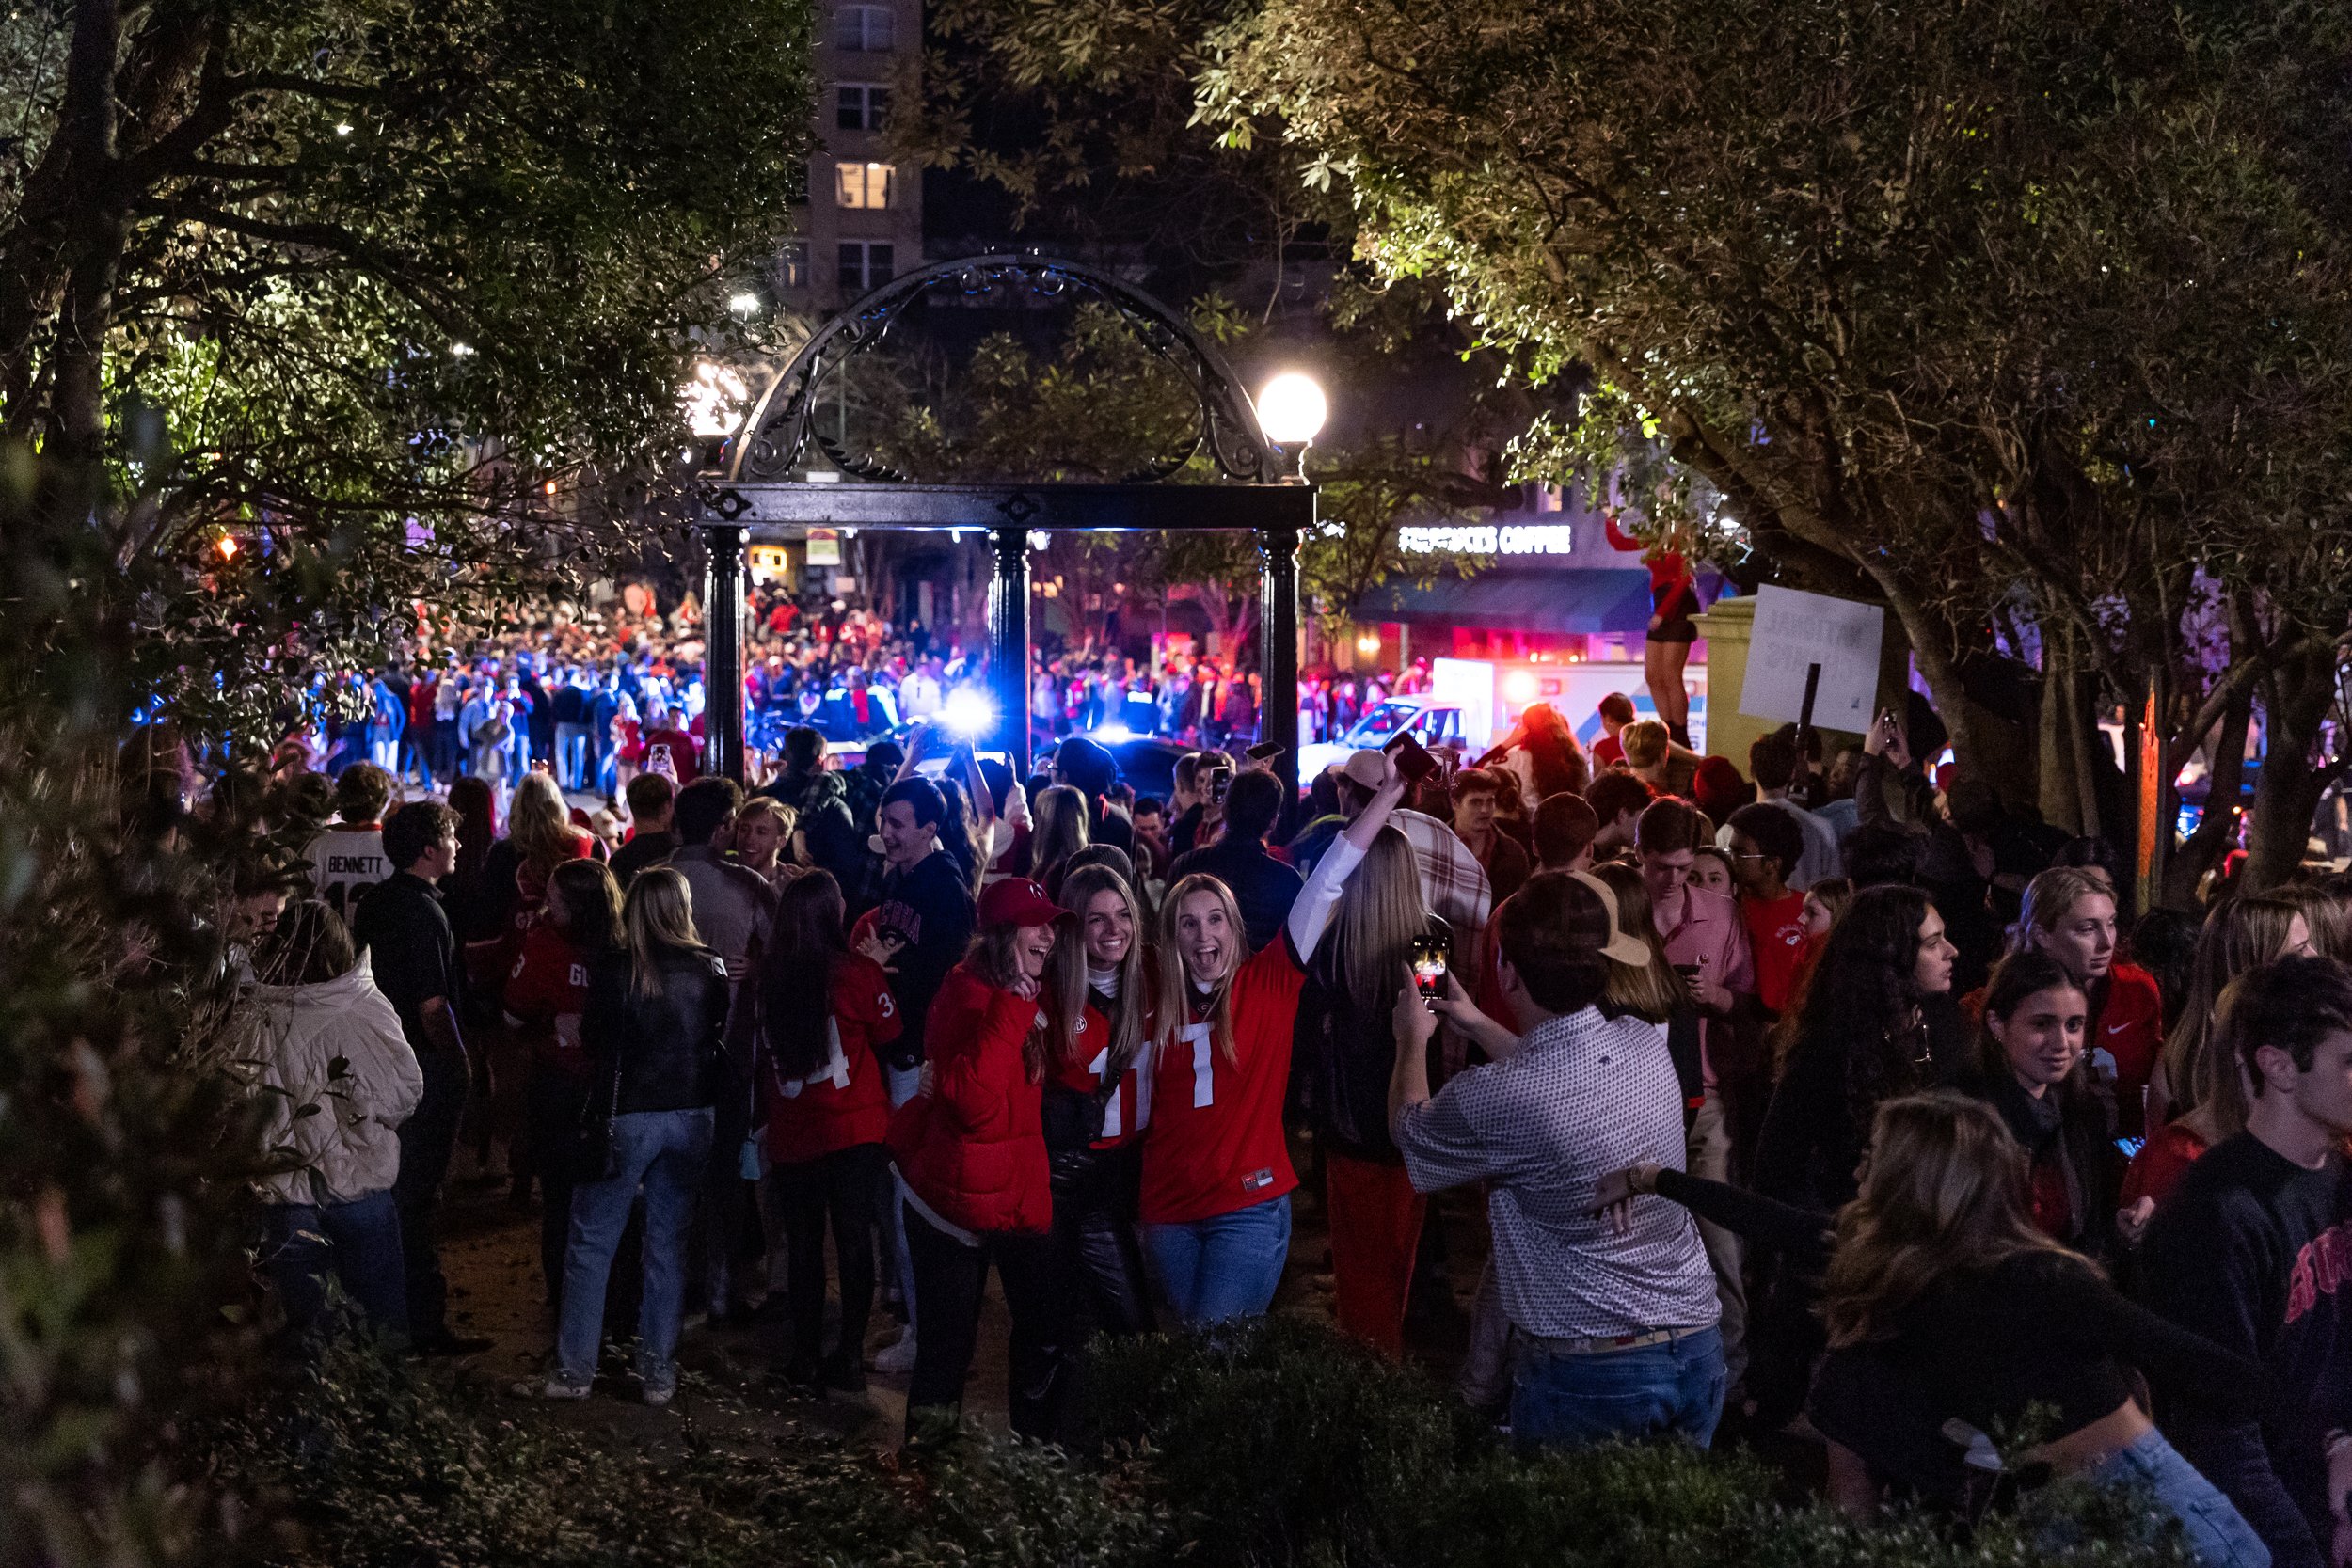  Thousands of UGA fans swarm the Arch in celebration of UGA’s historic victory over TCU during the CFP National Championship, in downtown Athens, Ga., on Monday, Jan. 9, 2023.  